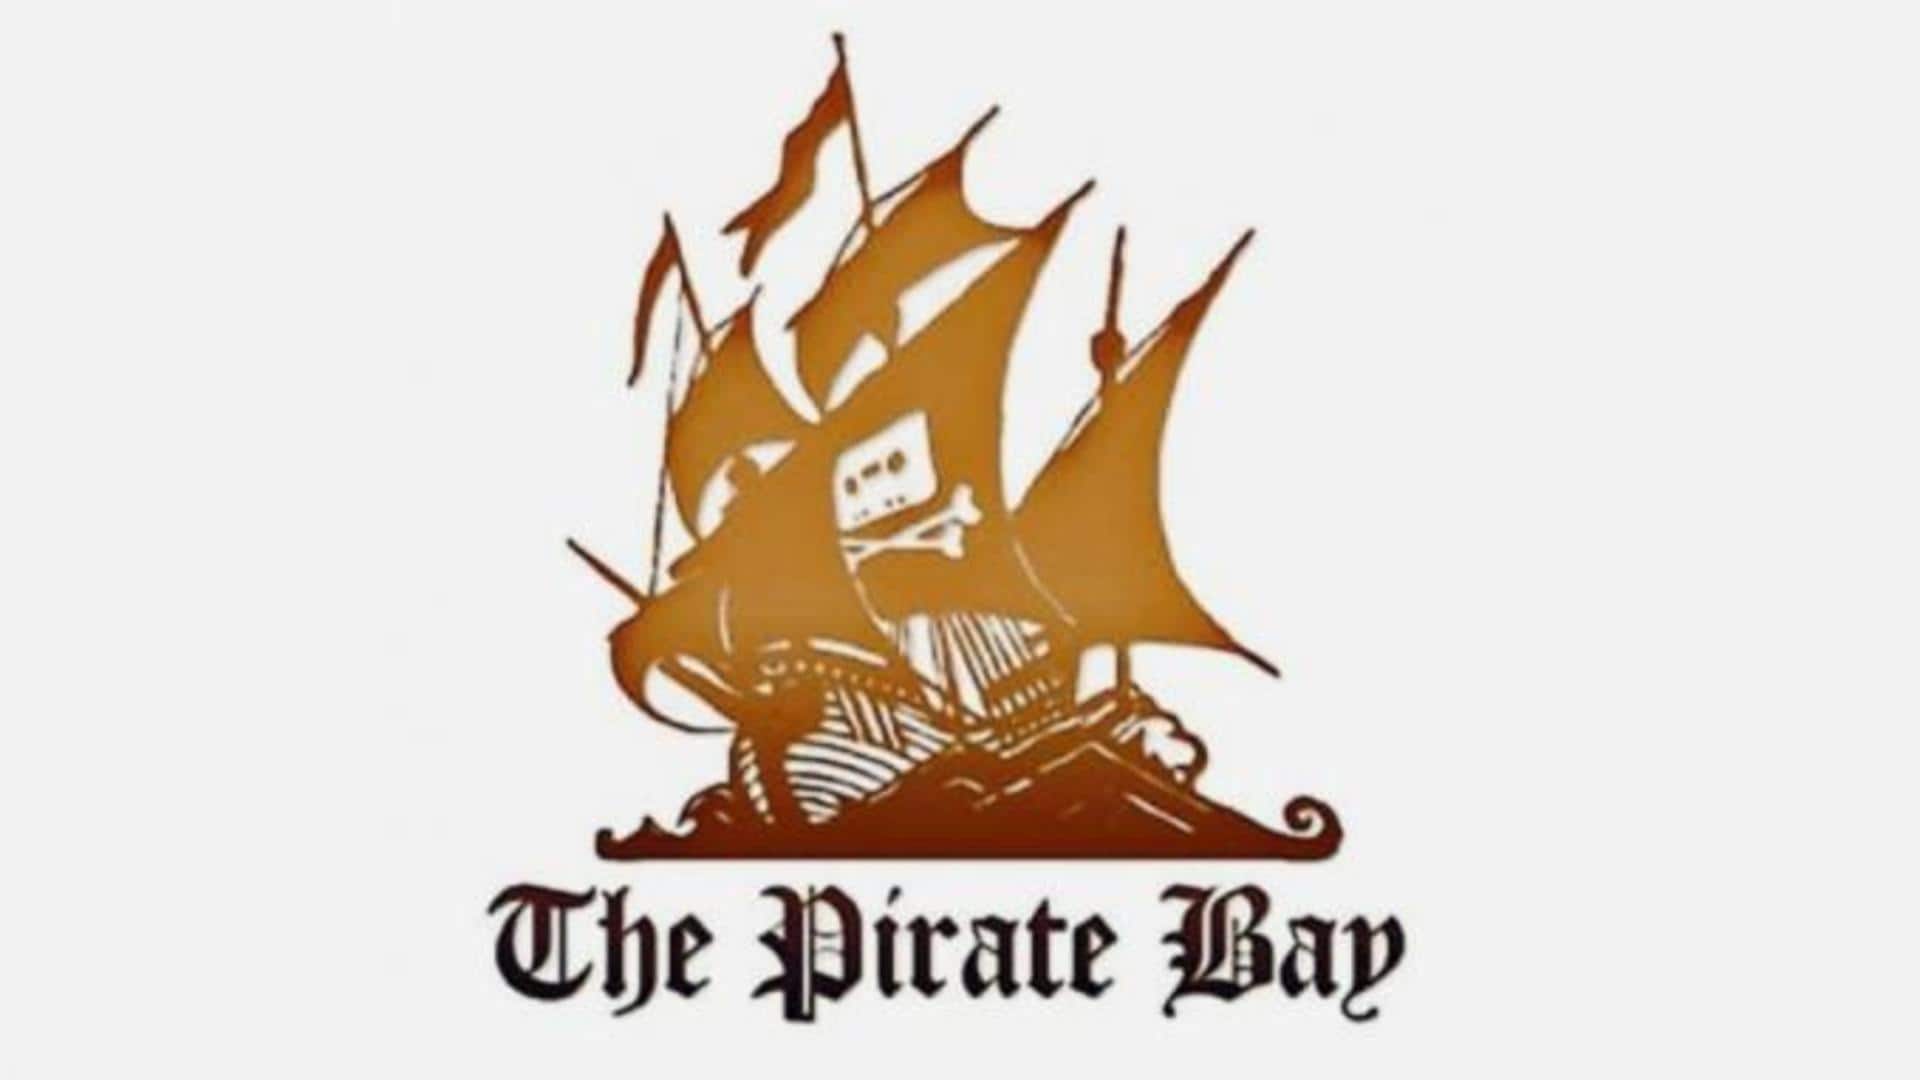 'The Pirate Bay' series to go on floors soon